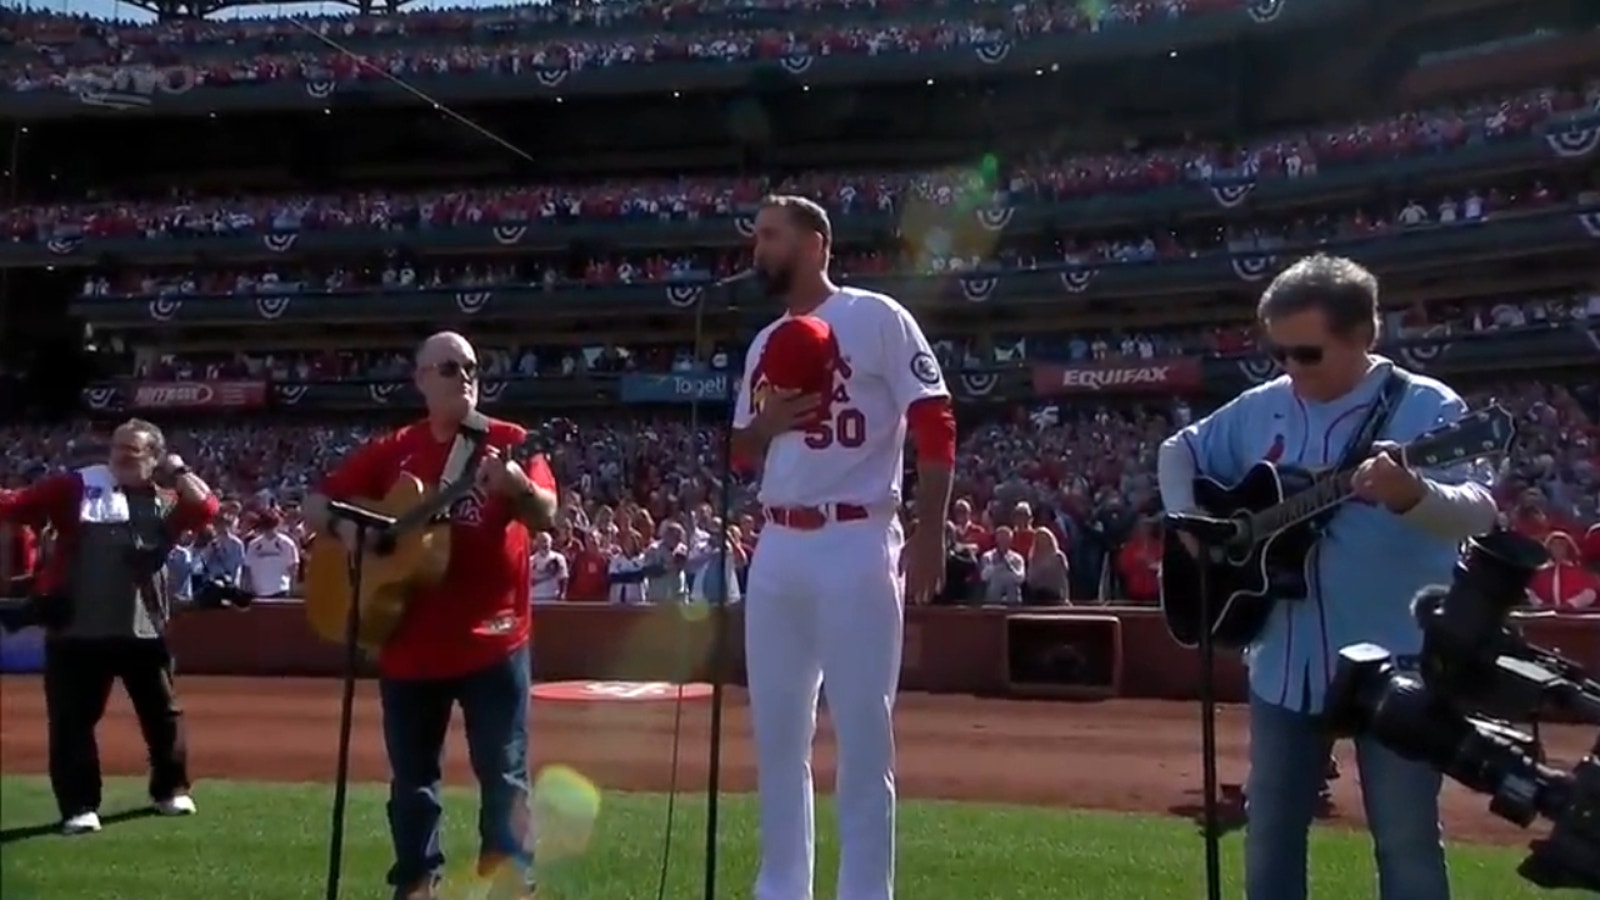 Cardinals' pitcher Adam Wainwright performs the National Anthem before playing against the Bluejays